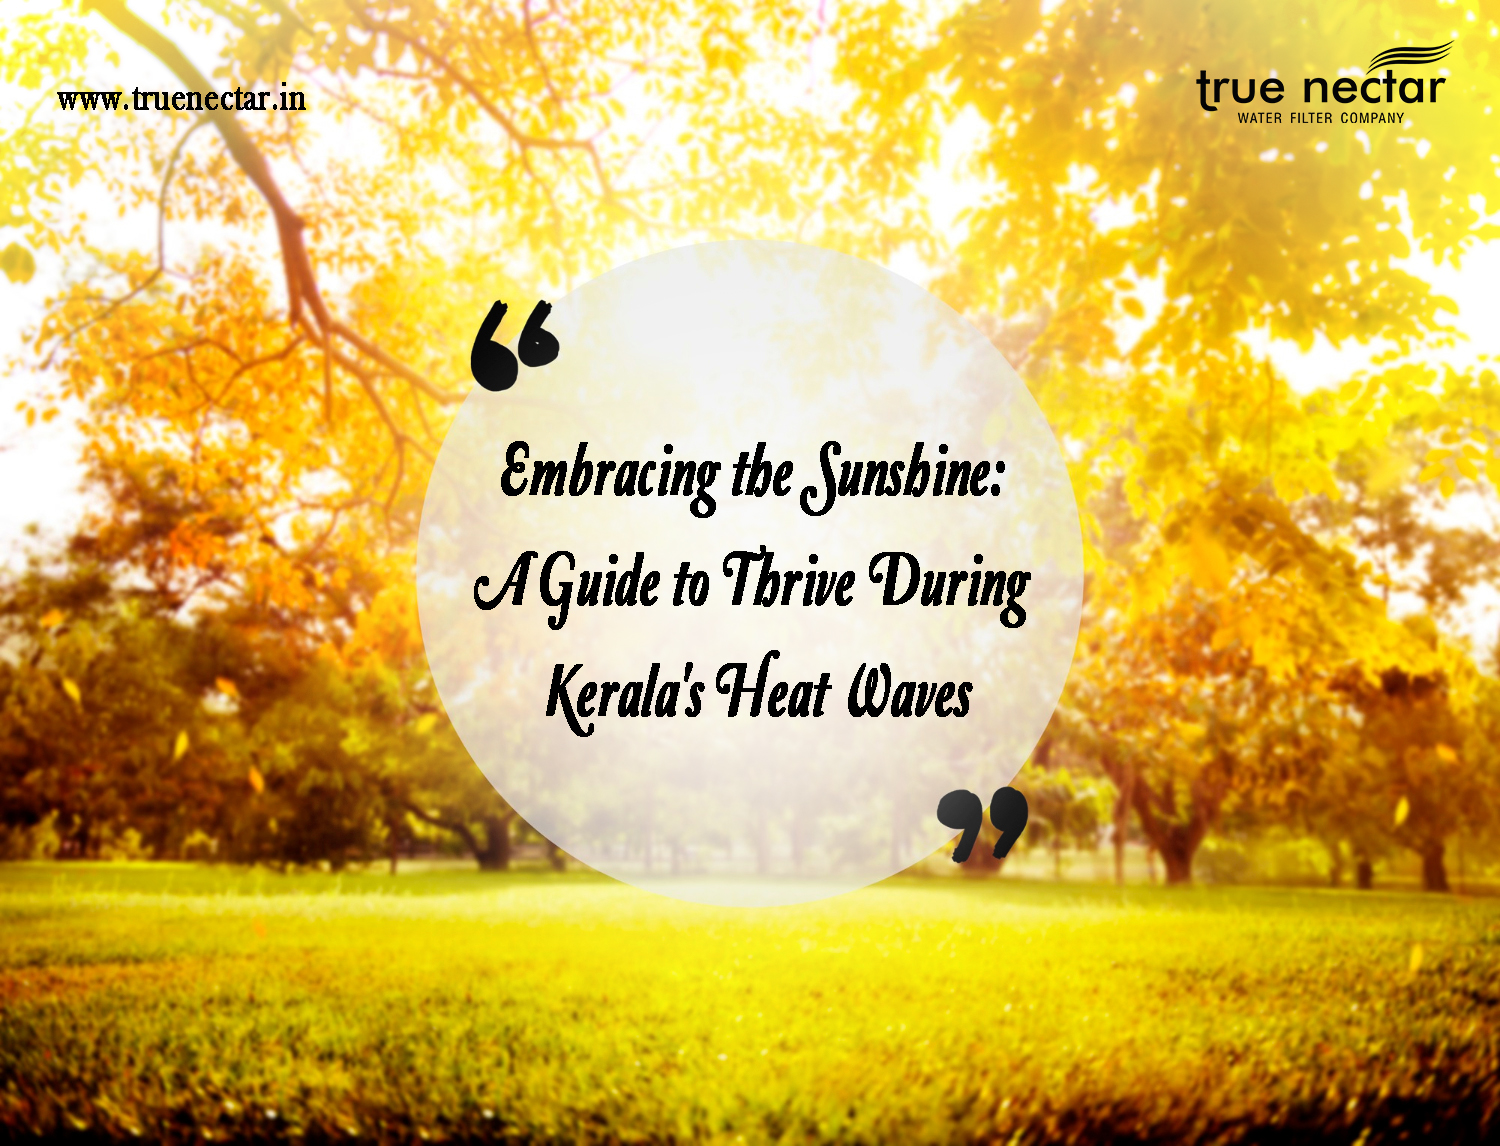 Embracing the Sunshine - A Guide to Thrive During Kerala's Heat Waves